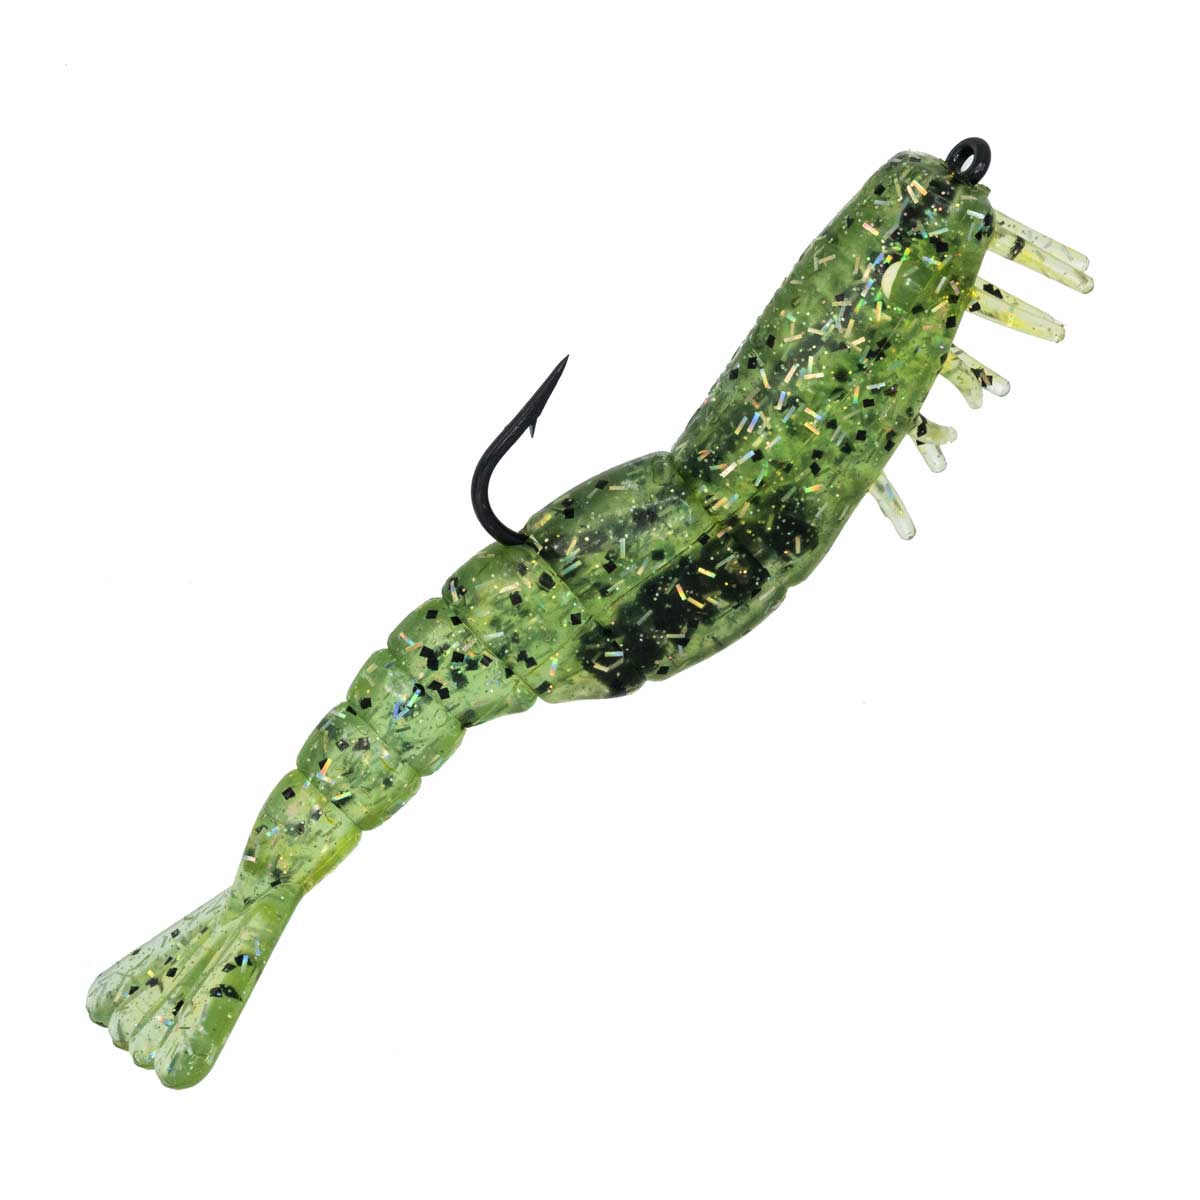 TRUSCEND Pre-Rigged Fishing Lures, Premium Shrimp Lure with